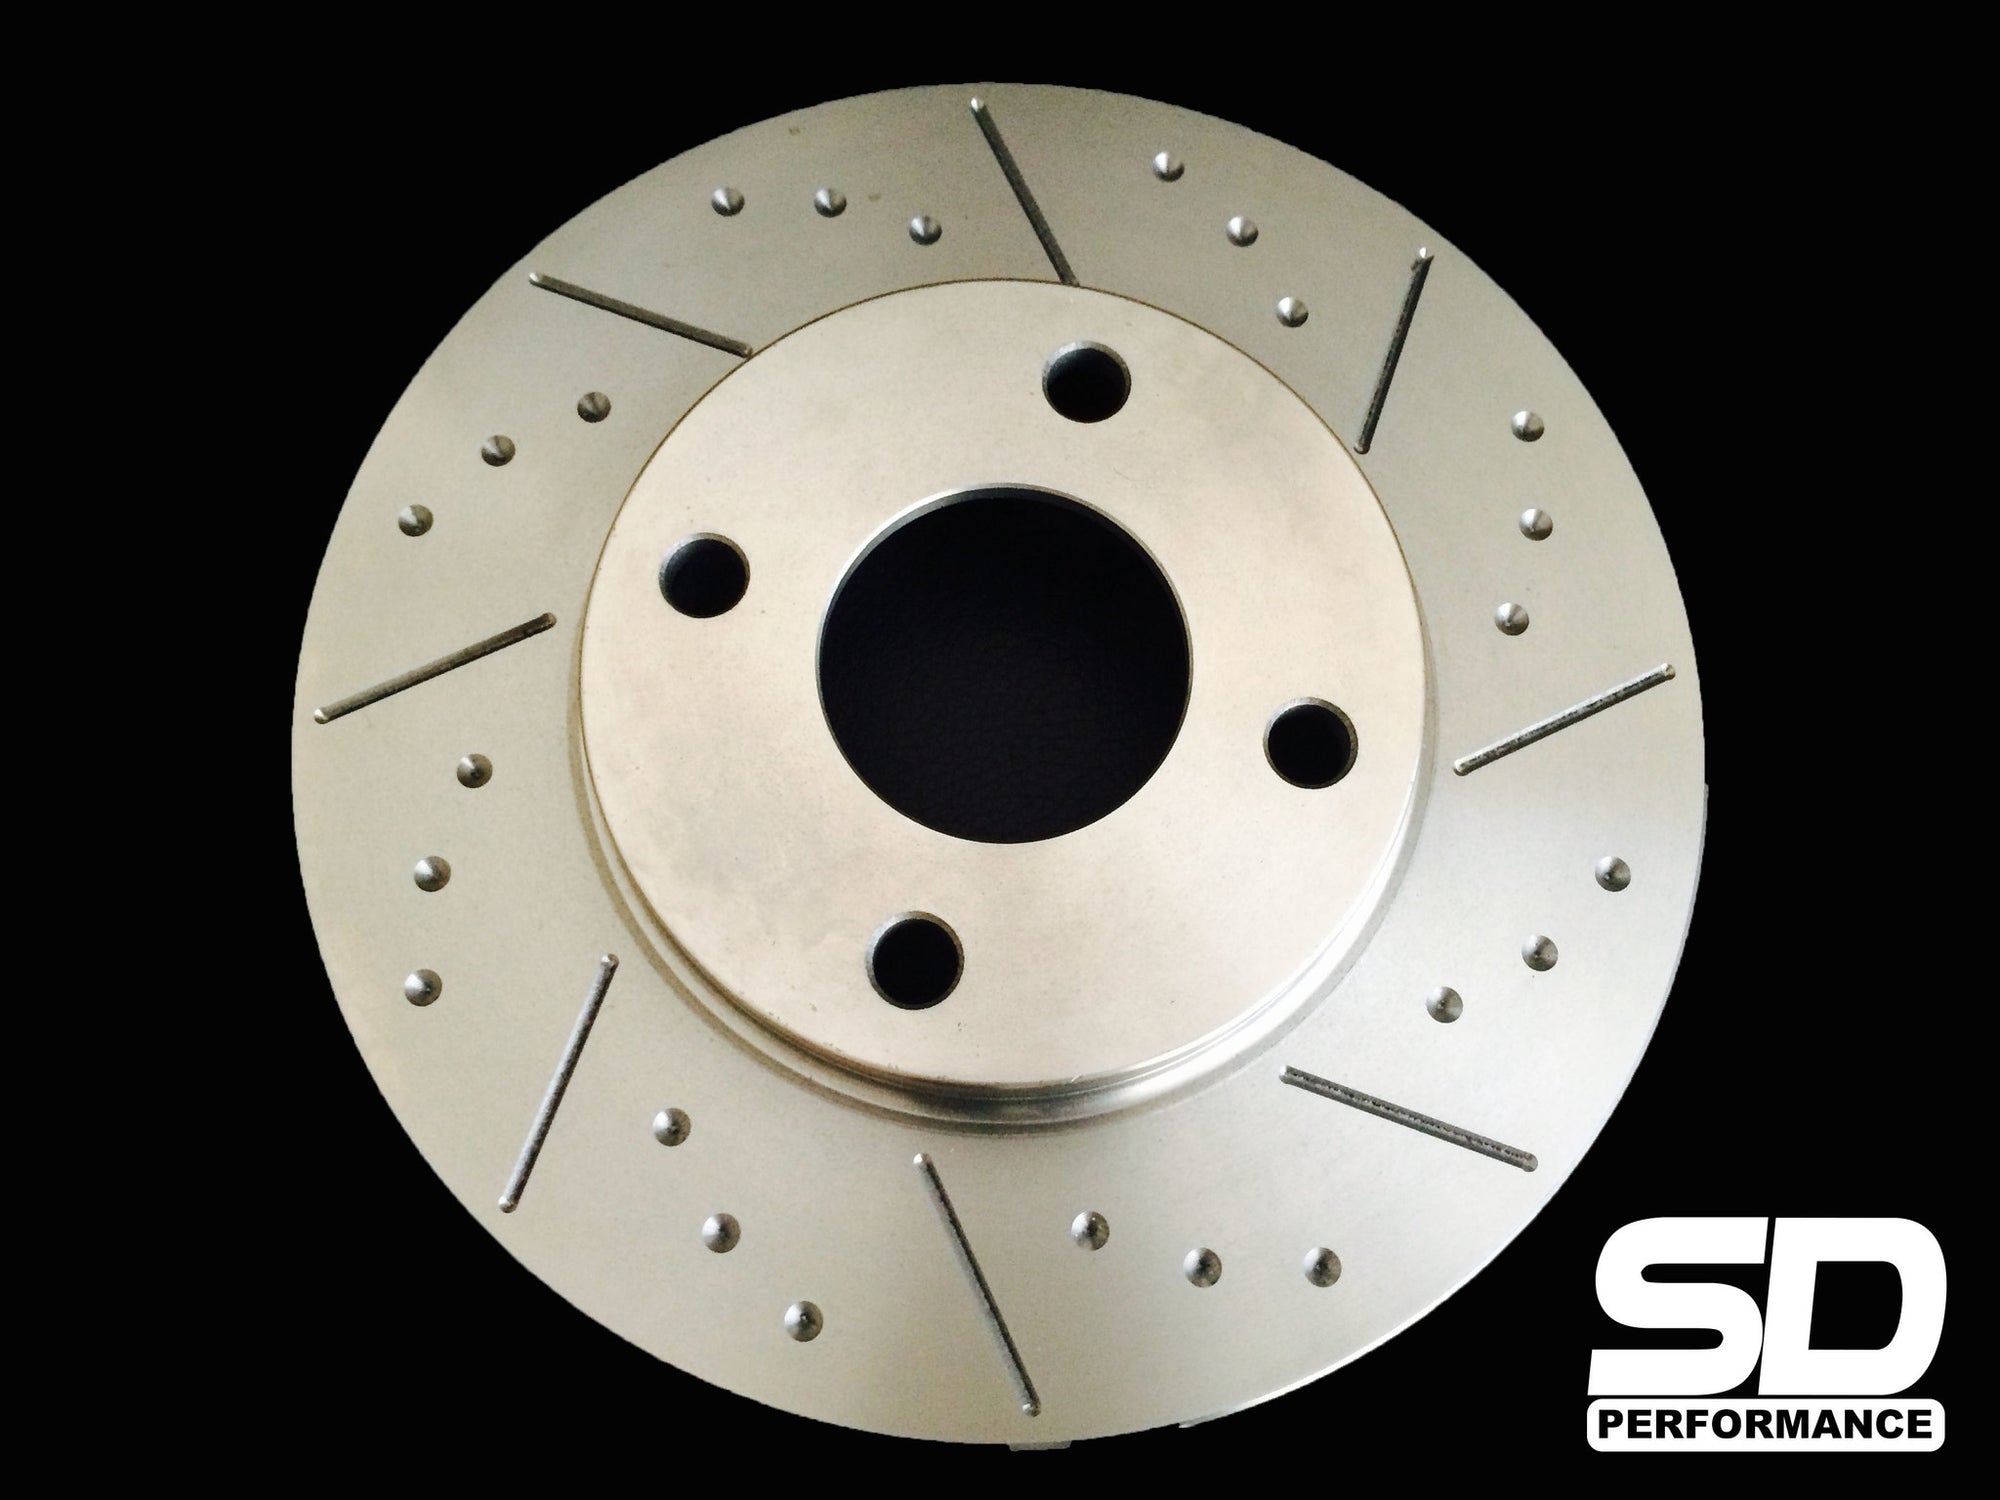 SD Performance Fiesta MK6 1.25 - 1.6 Performance front discs - Dimpled and Grooved